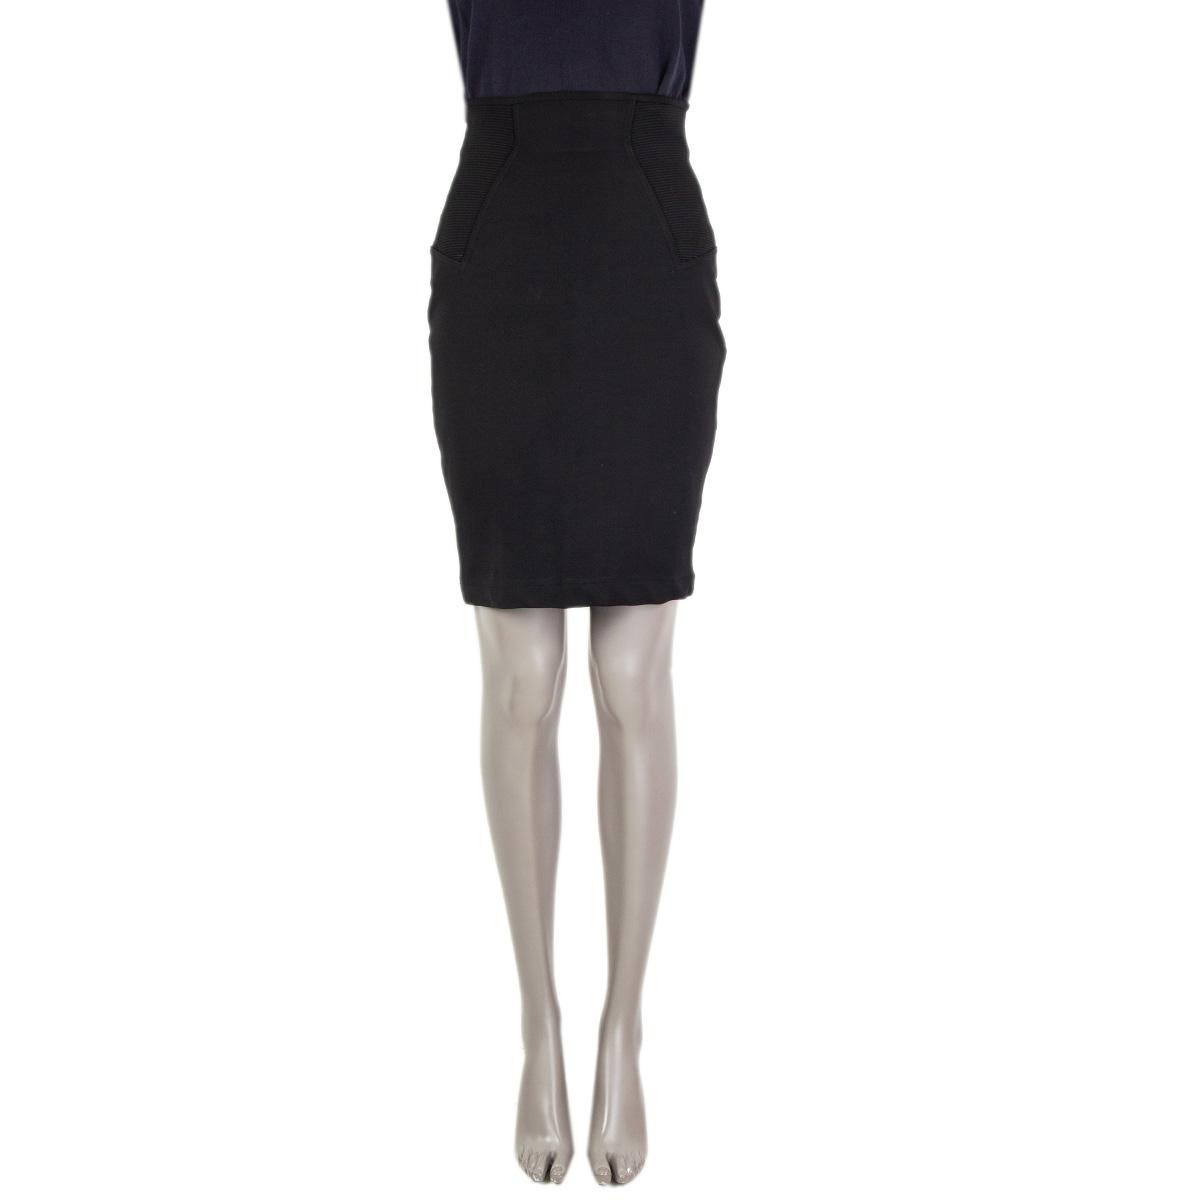 100% authentic Alaia knit pencil skirt in black rayon (85%) and elastane (15%). Is a slip on skirt with a tight-fit. Features rib details on the sides and the back. Has been worn and is in excellent condition.

Measurements
Tag